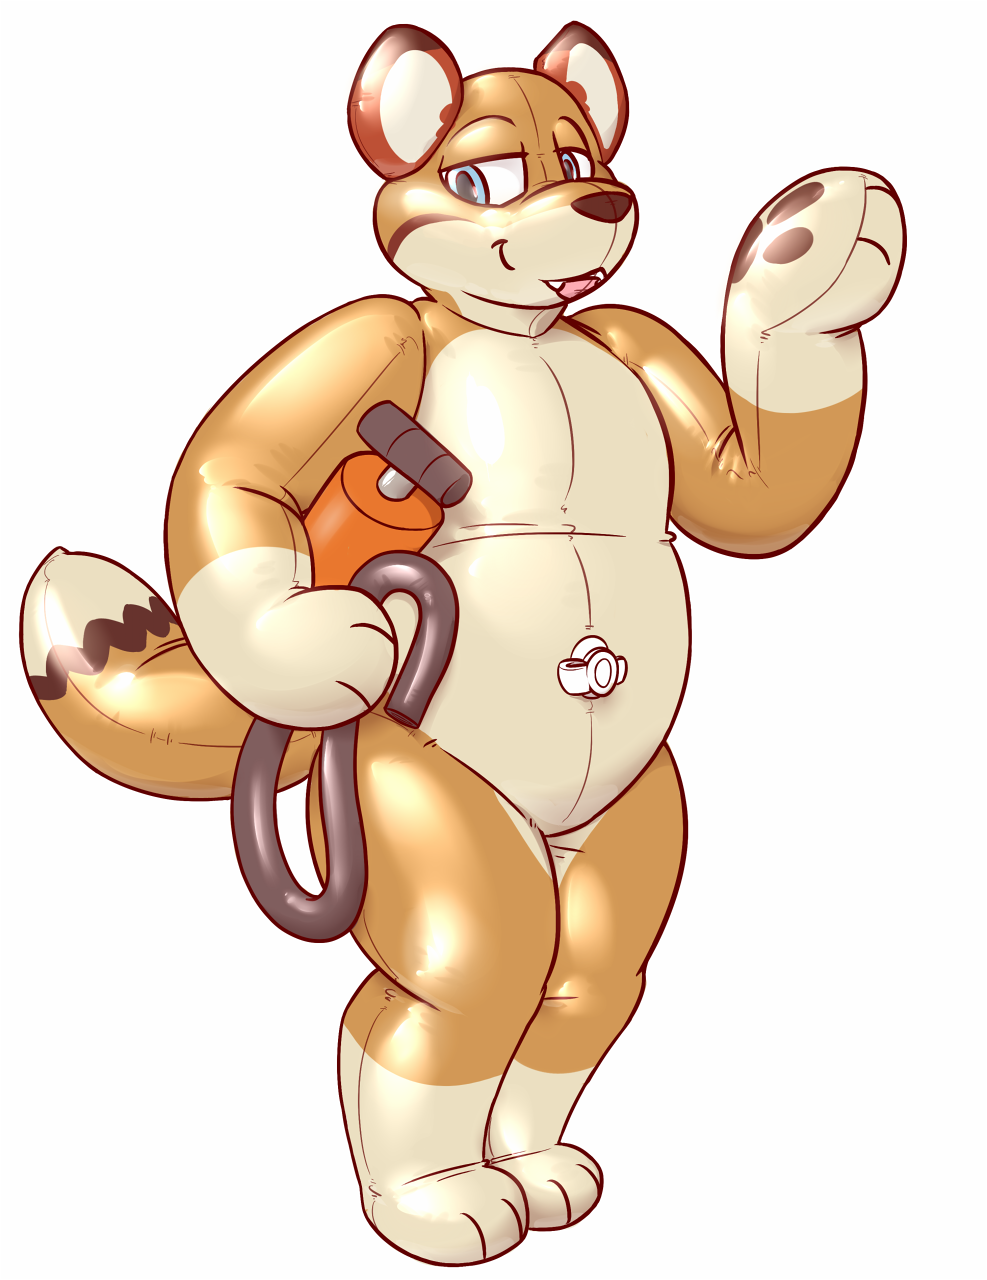 Most recent image: Pooltoy Coyote